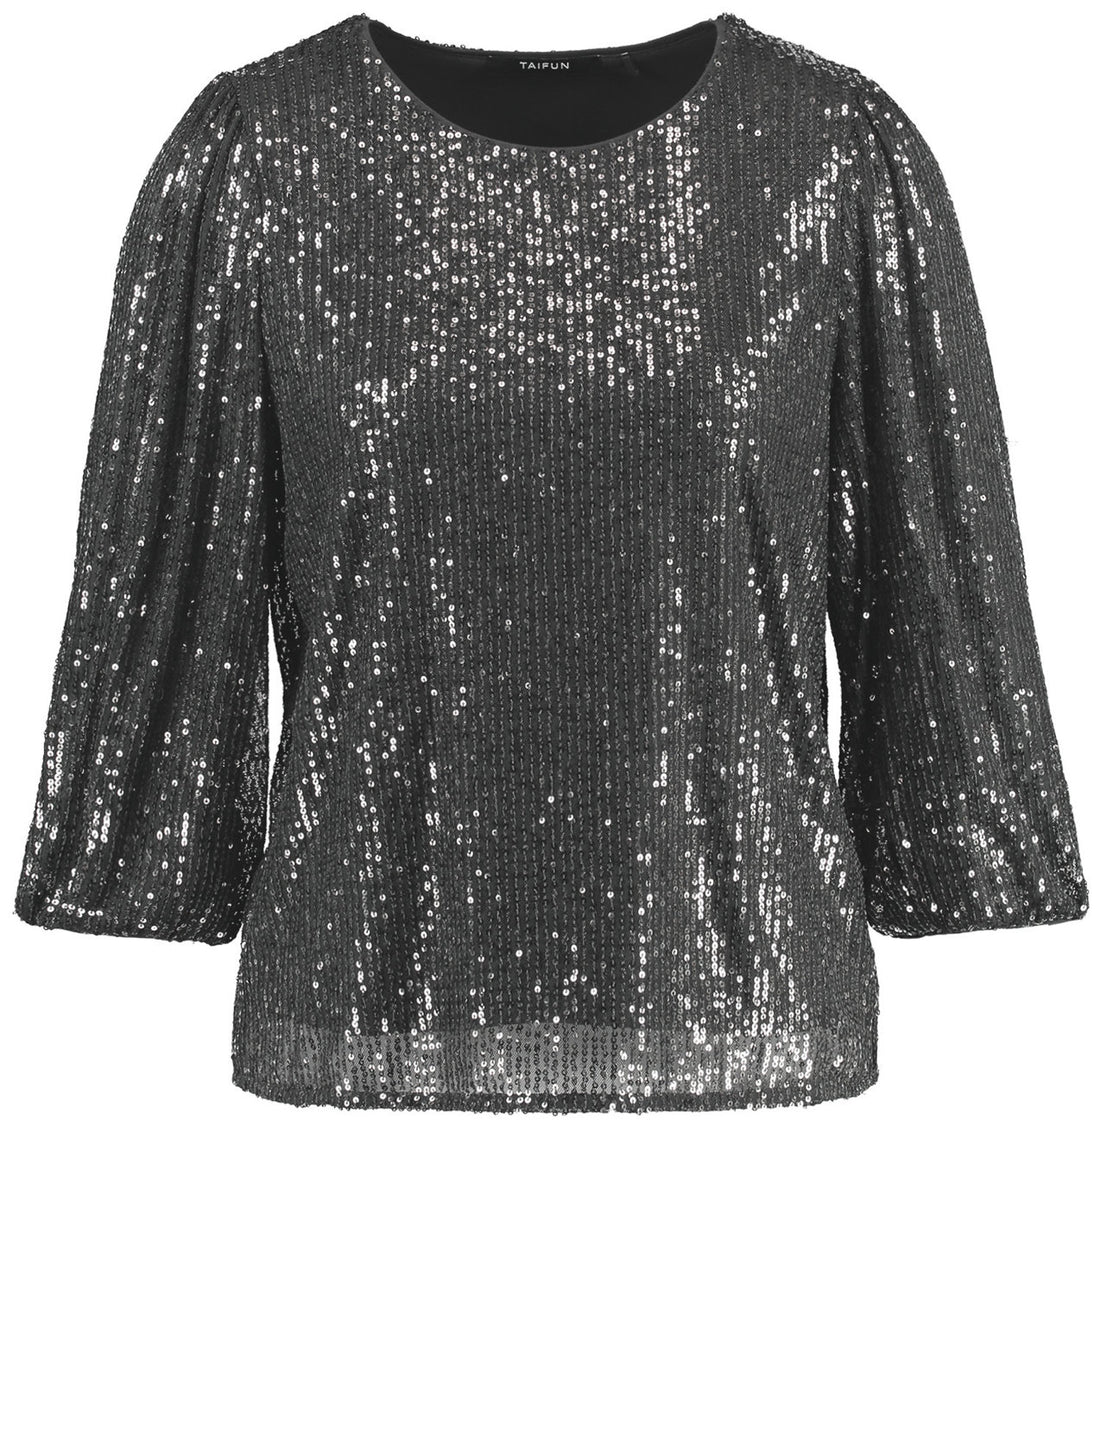 Blouse Top With All-Over Sequins_571314-16106_2270_02